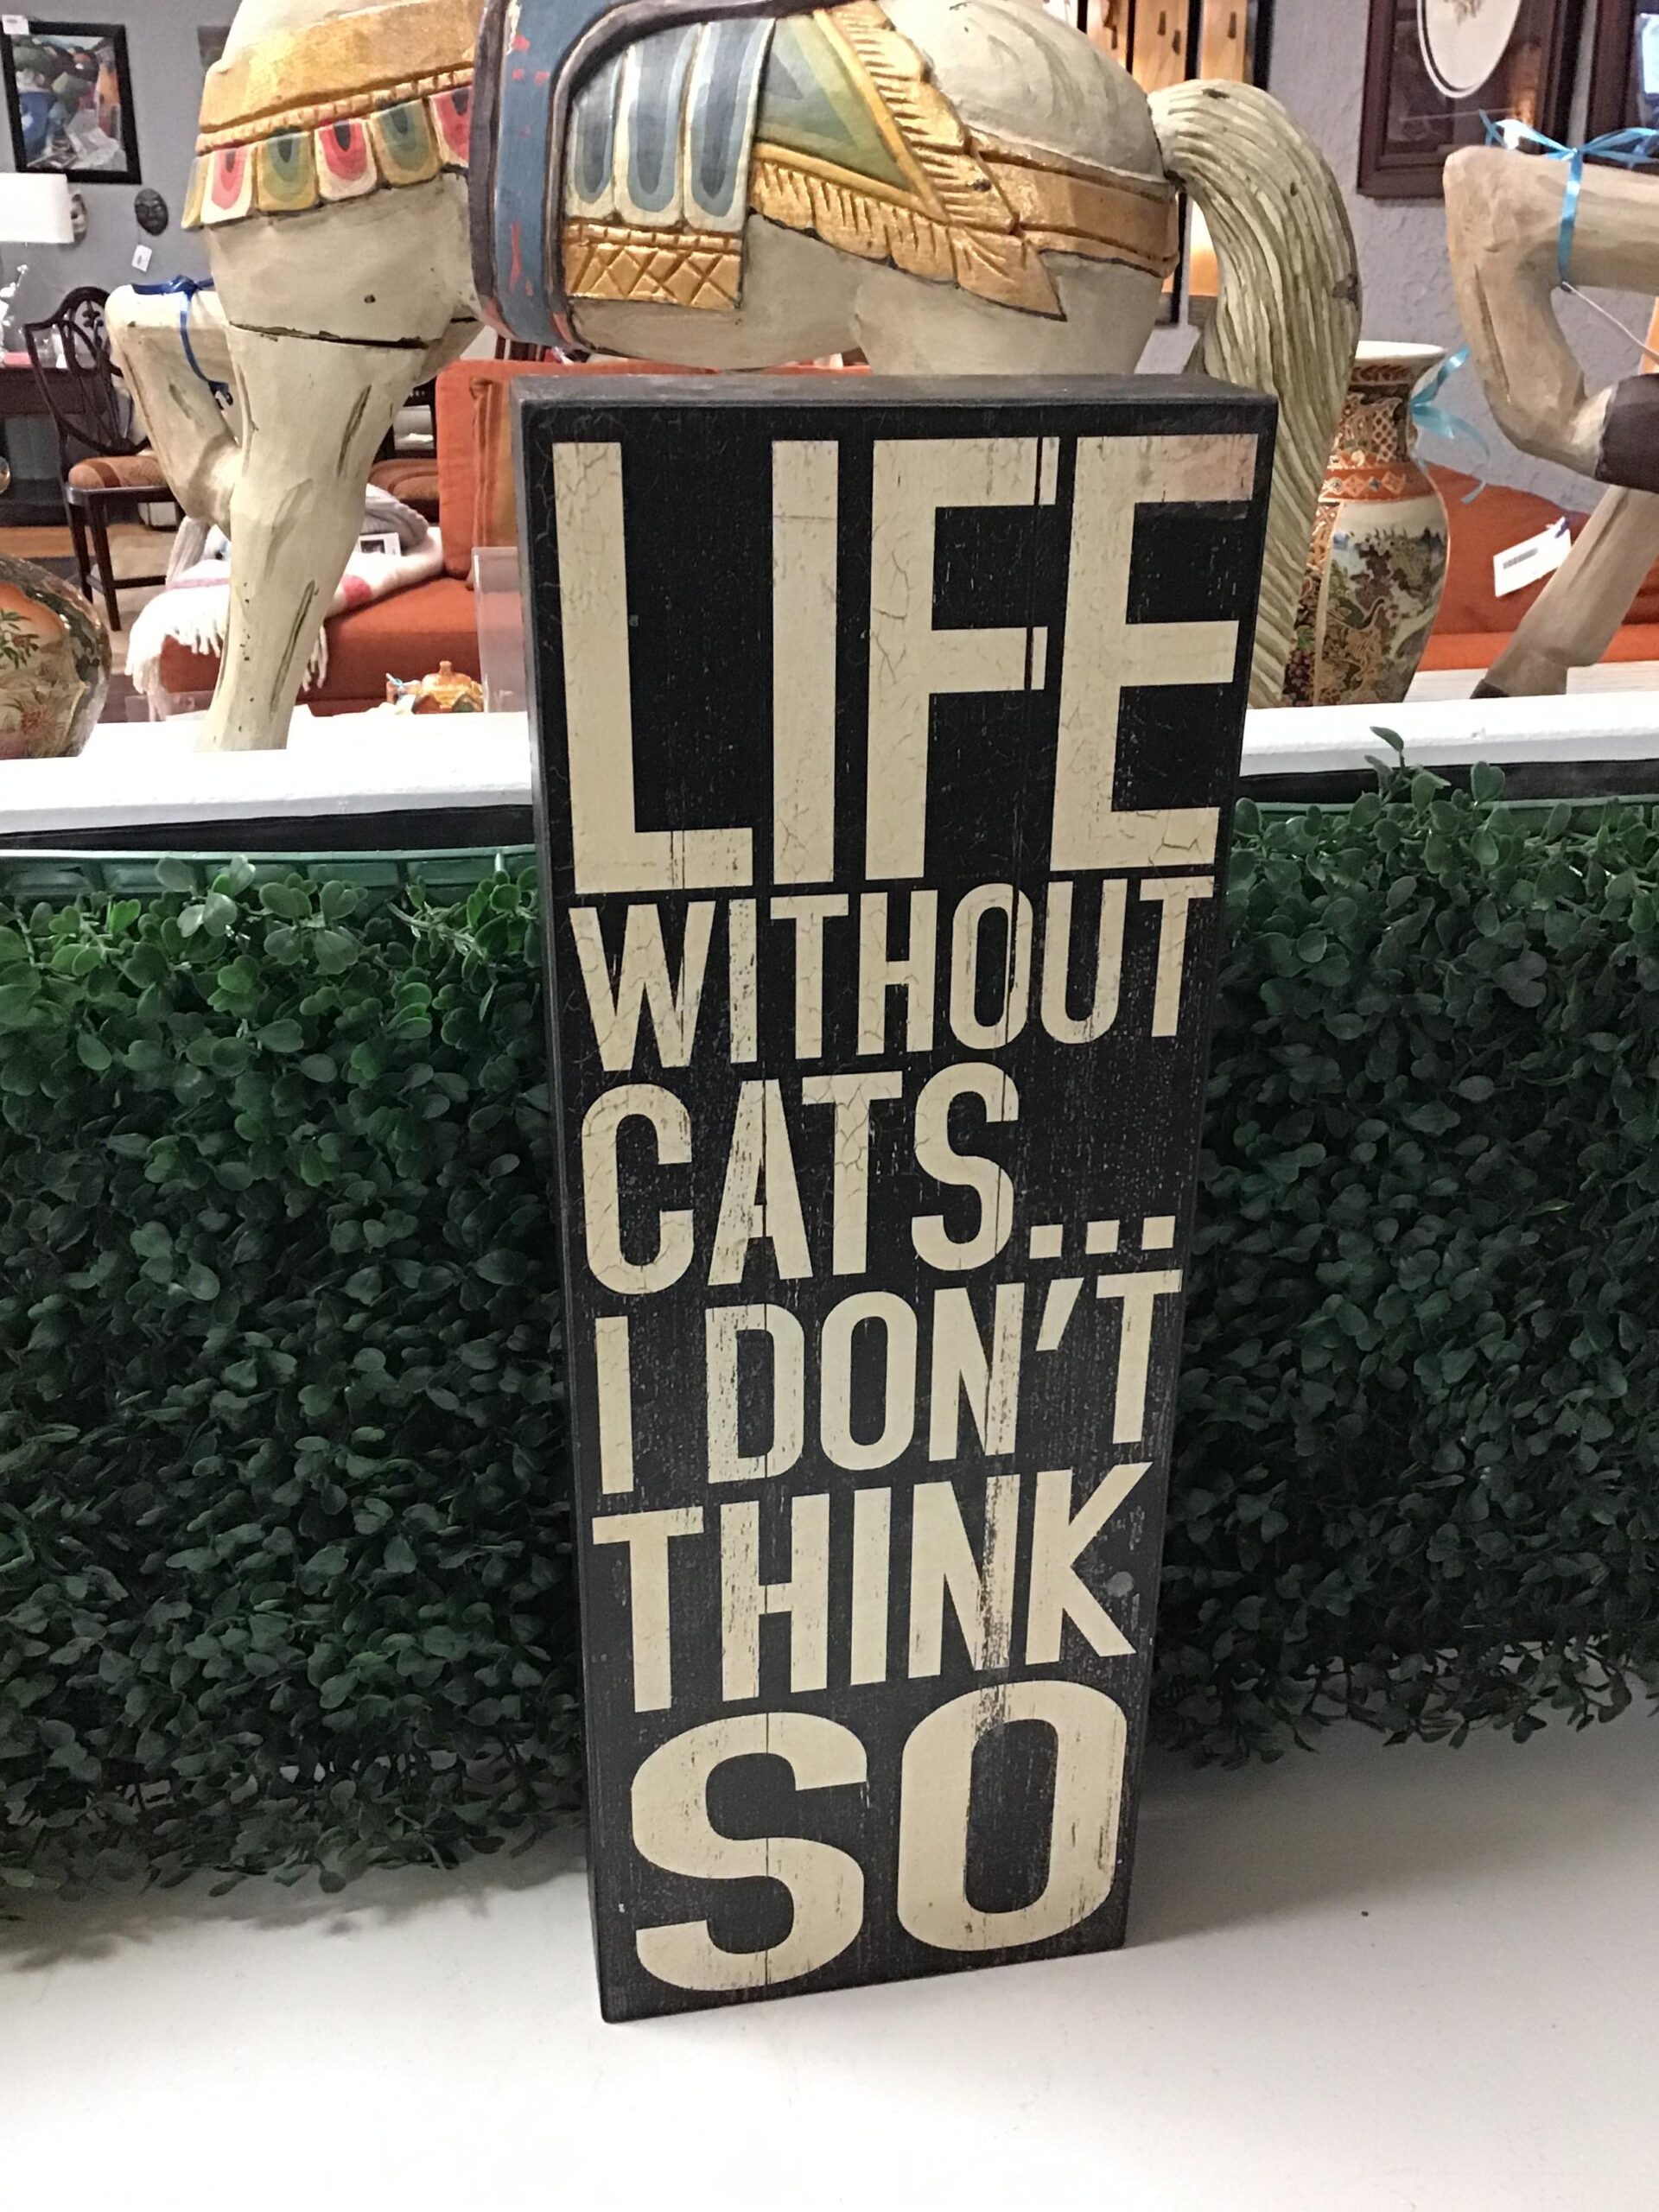 LIFE WITHOUT CATS…I DON’T THINK SO